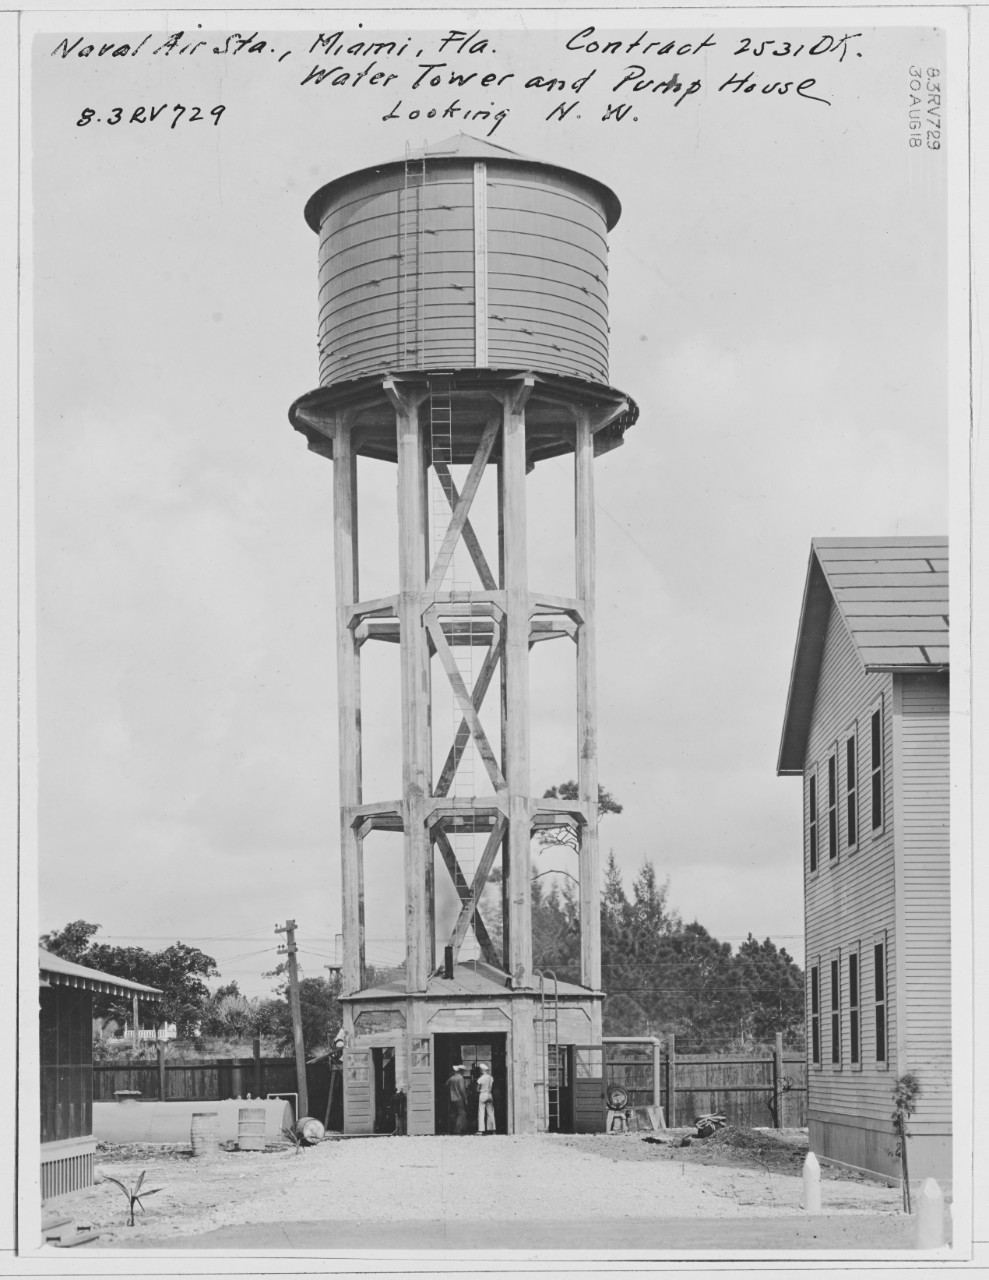 Water Tower and pump house, Naval Air Station Miami, Florida.